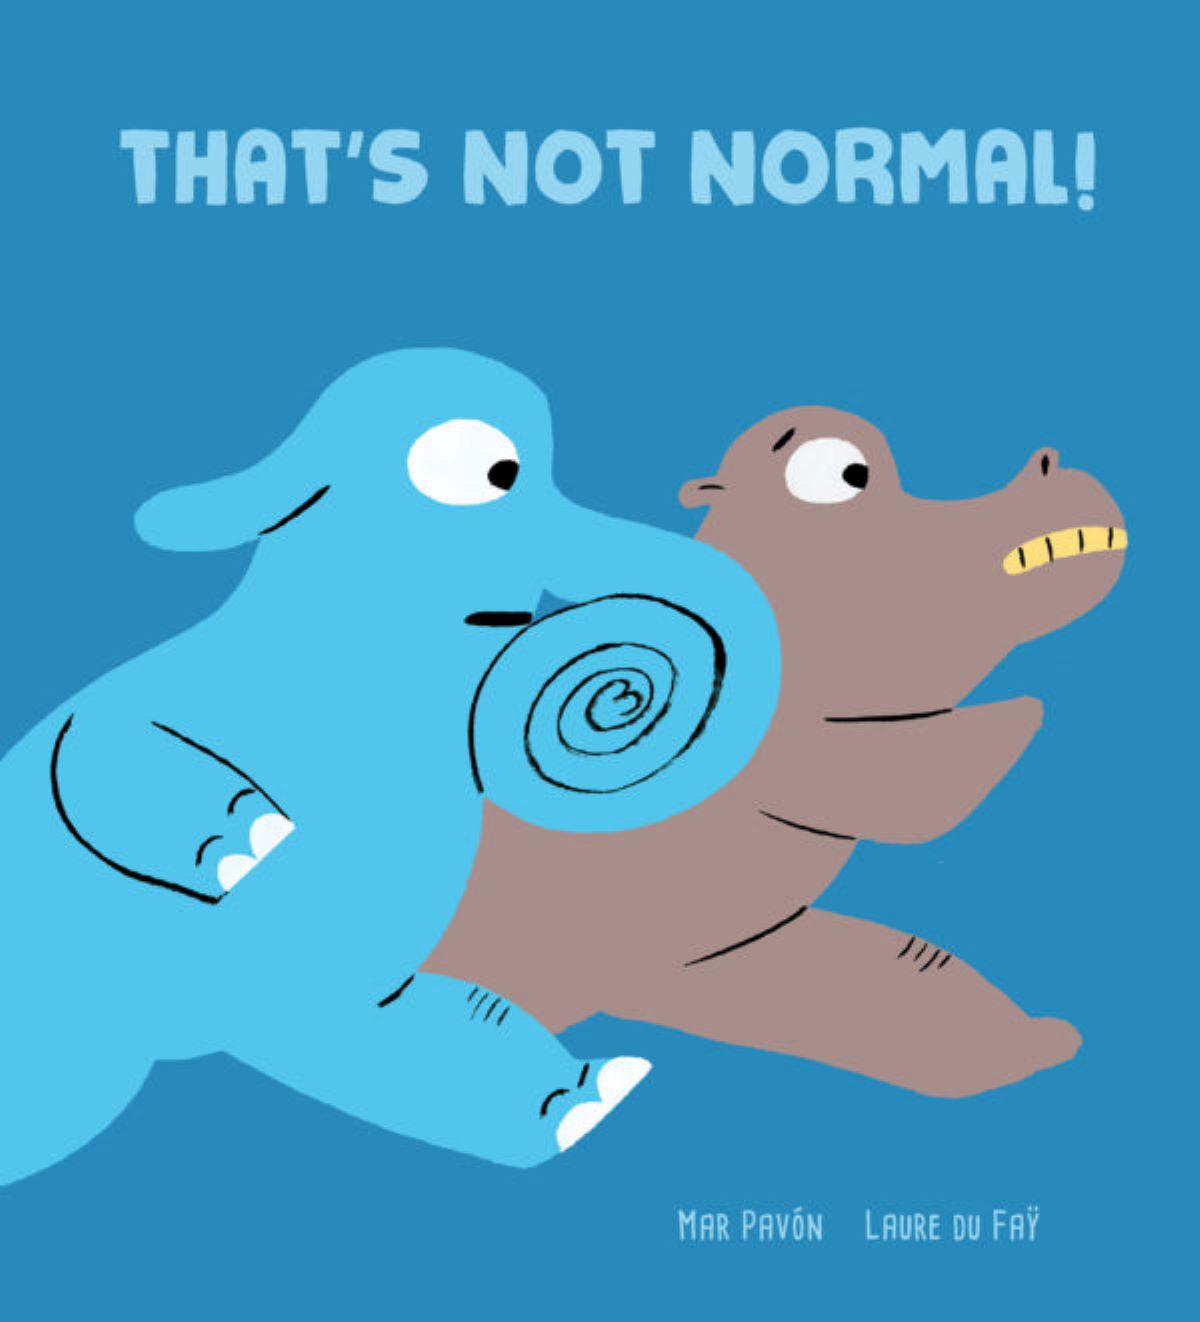 Cover of picture book "That's Not Normal!" Light blue Elephant with coiled up trunk is running with gray hippopotamus on a dark blue background. 